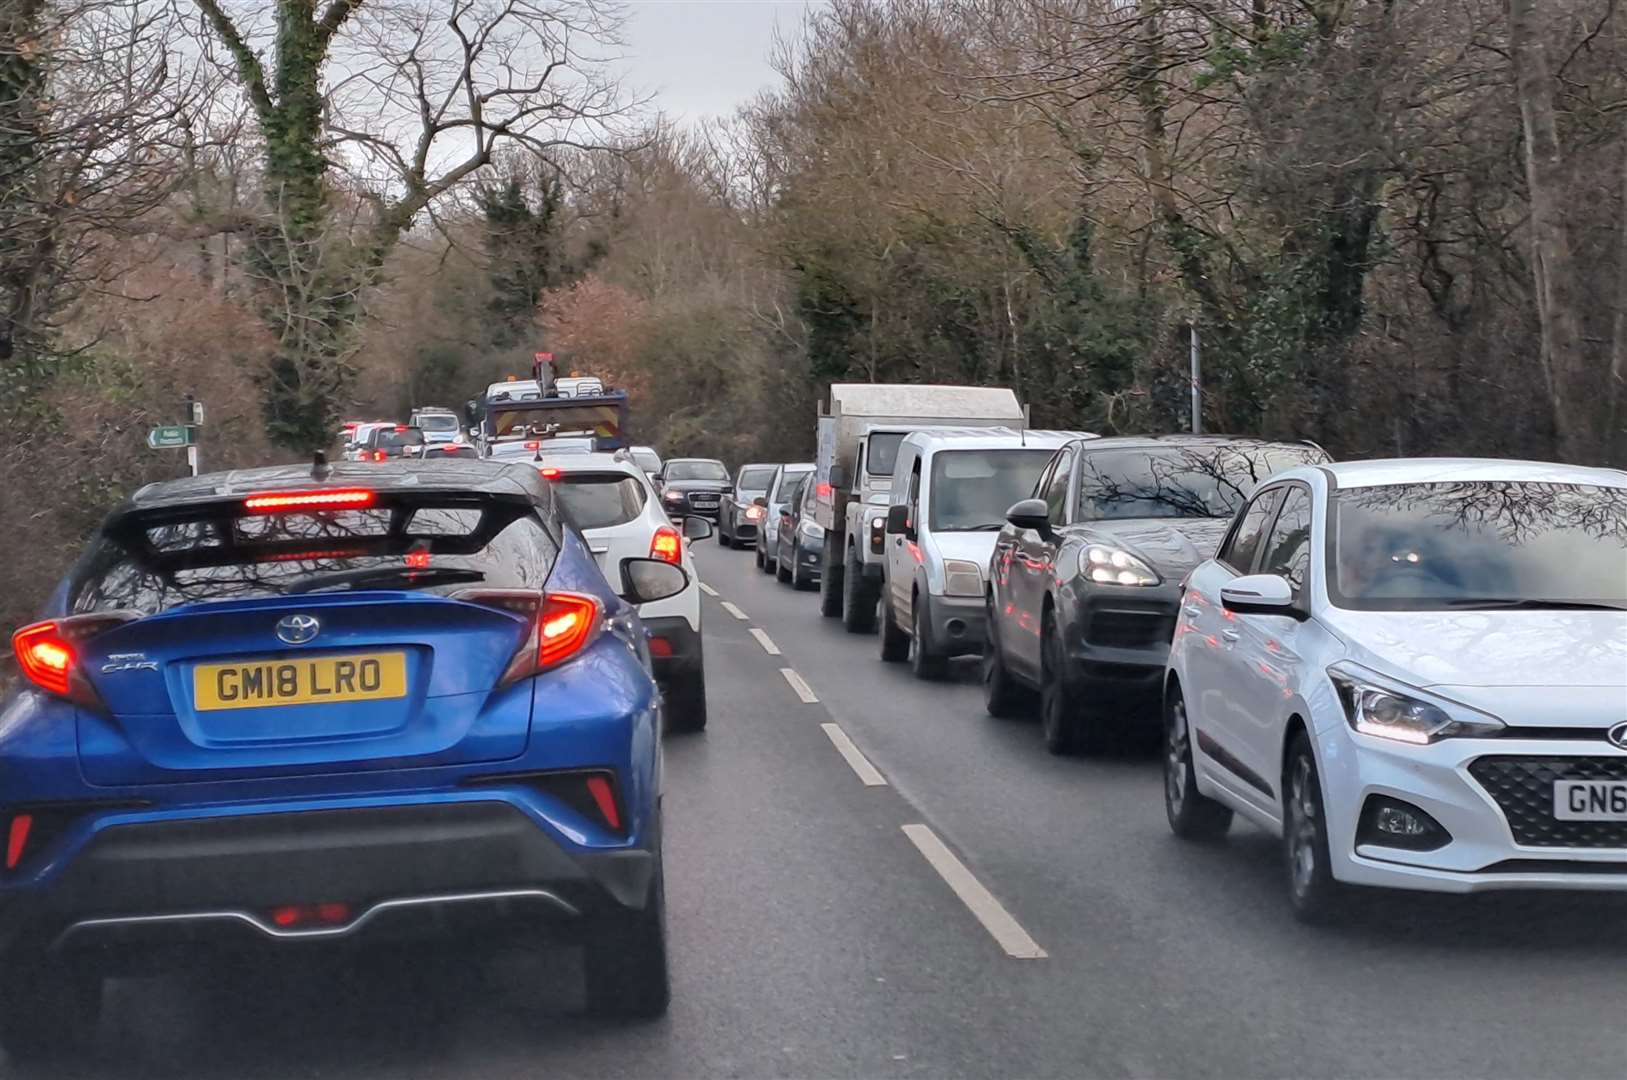 The A291 in Herne Common had heavy queues both ways